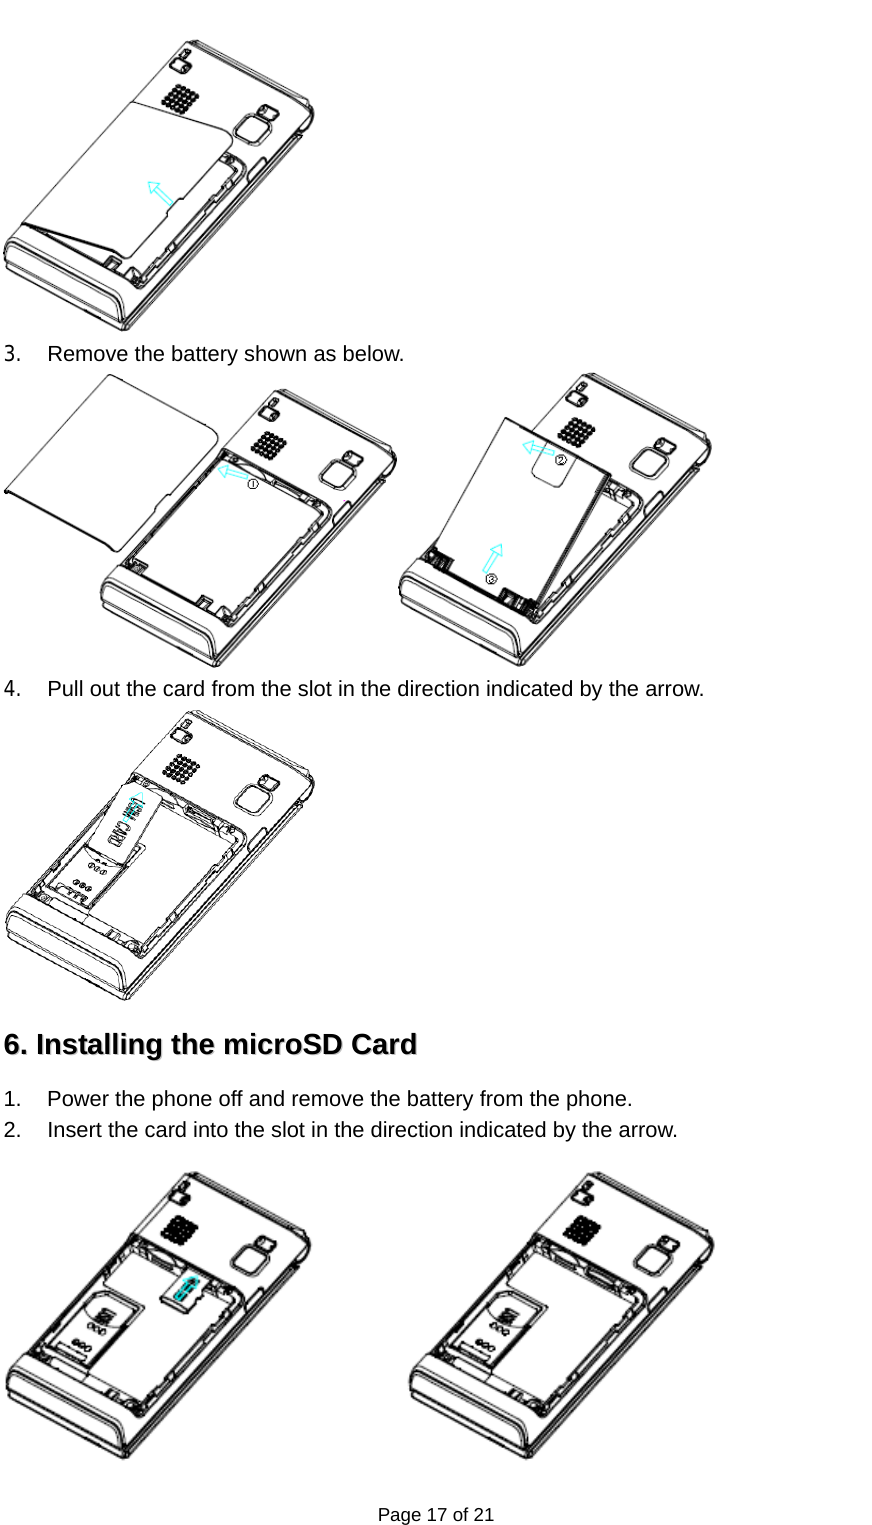   Page 17 of 21  3.  Remove the battery shown as below.  4.  Pull out the card from the slot in the direction indicated by the arrow.  66..  IInnssttaalllliinngg  tthhee  mmiiccrrooSSDD  CCaarrdd  1.  Power the phone off and remove the battery from the phone. 2.  Insert the card into the slot in the direction indicated by the arrow.  